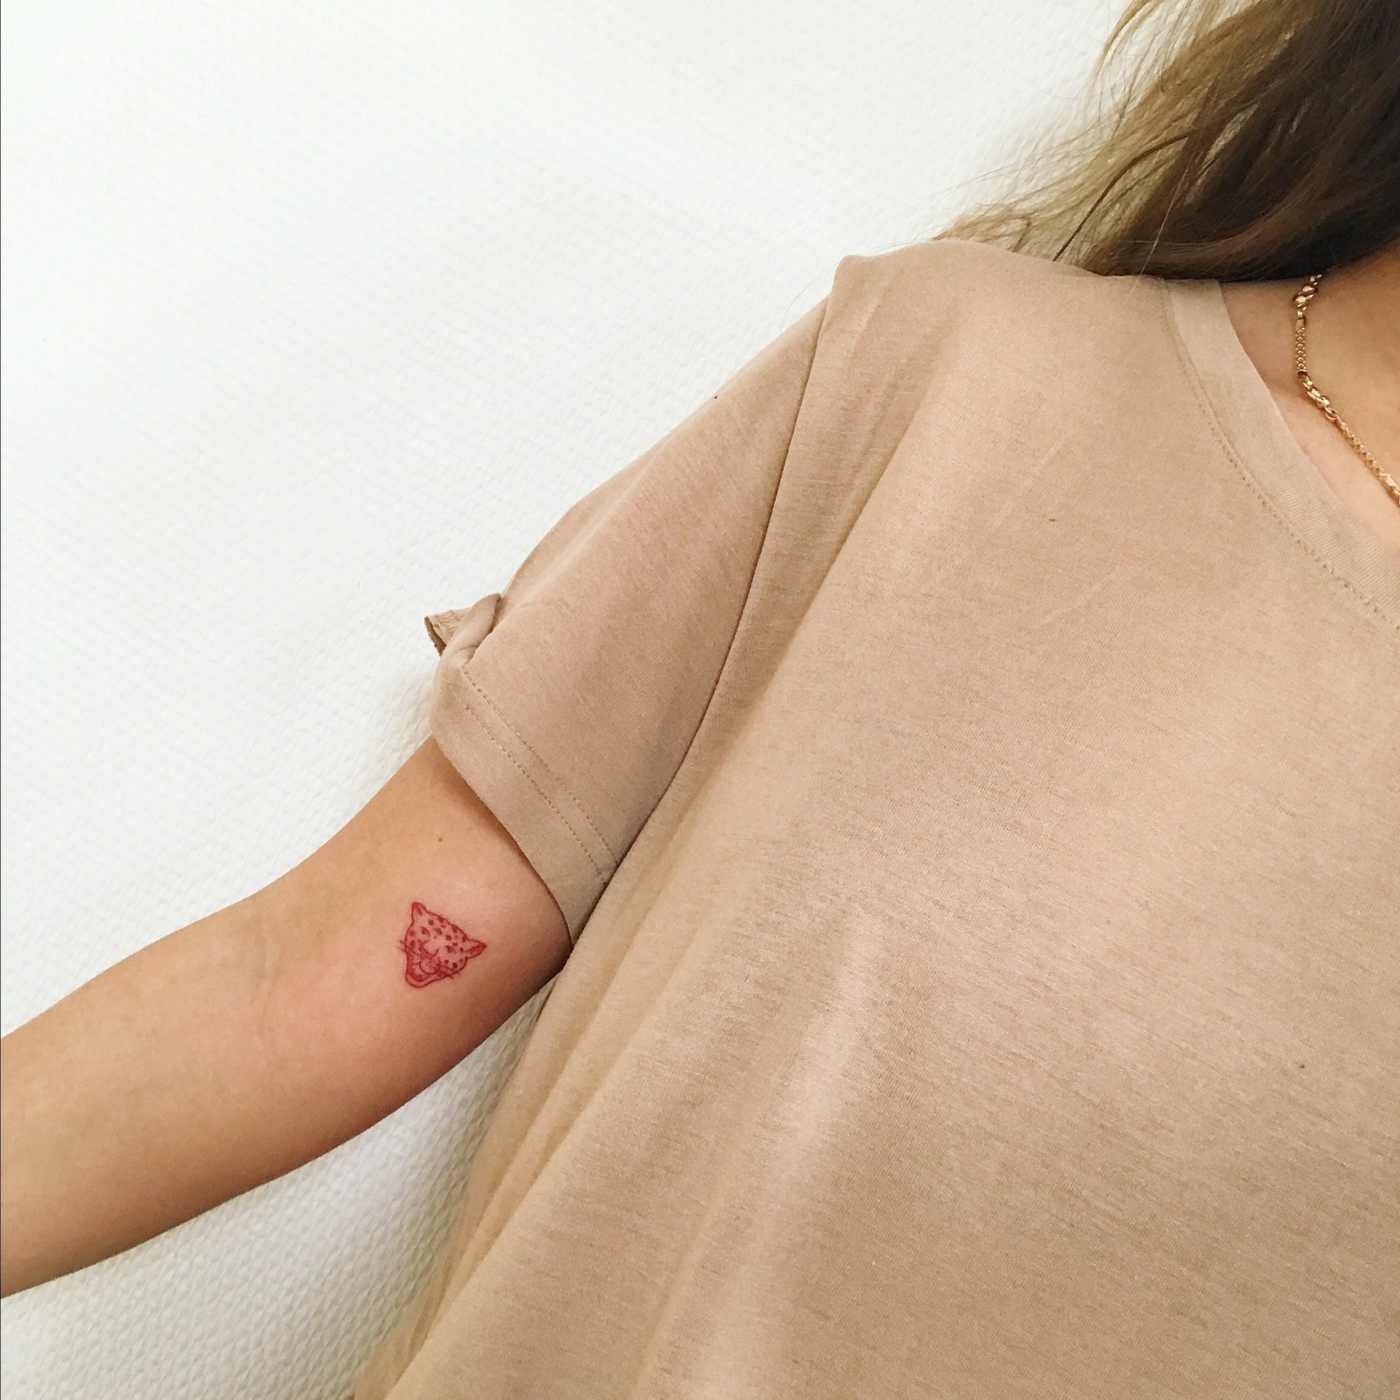 Small, Tattoos like Trend for Women - Leopard after the elbows